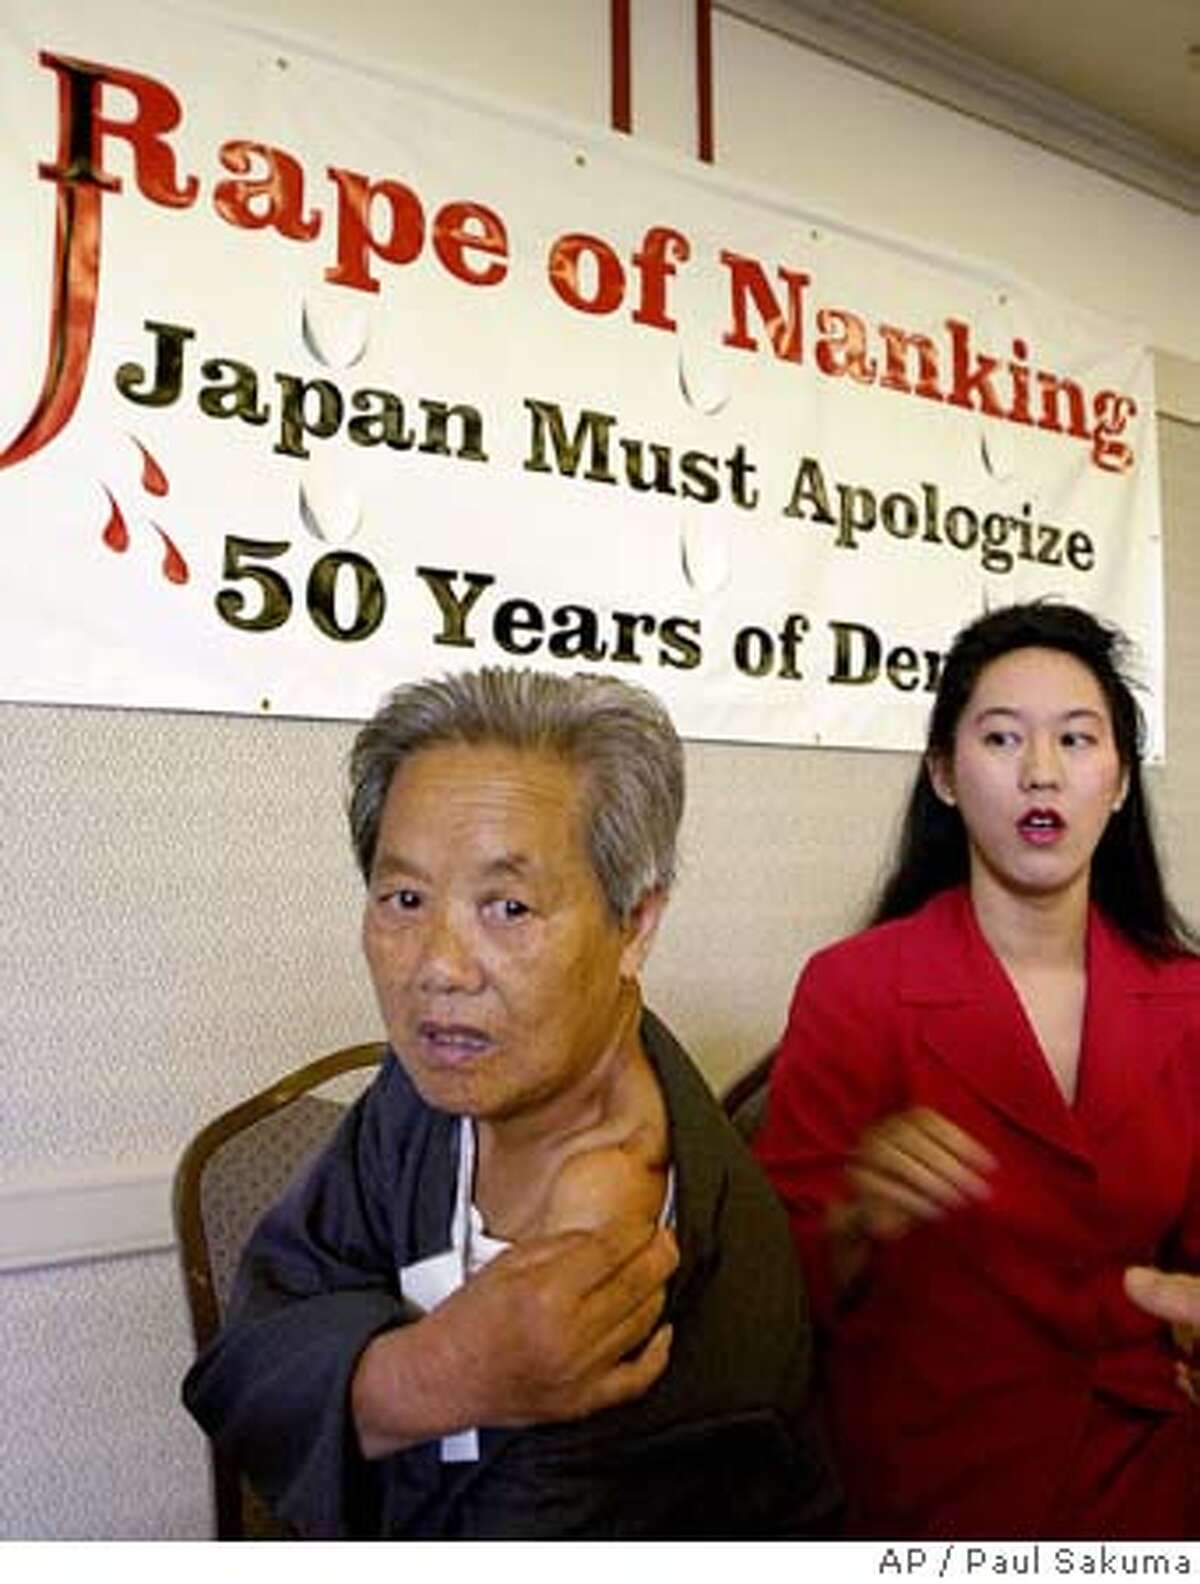 ** FILE ** Cuiping Ni, 75, shows off her scar as Iris Chang, right, author of "The Rape of Nanking," looks on during the opening of the conference, "50 Year of Denial: Japan and Its Wartime Responsibilities," in San Francisco, Friday, Sept. 7, 2001. Chang, a best-selling author who chronicled the Japanese occupation of China and the history of Chinese immigrants in the United States, has died of a self-inflicted gunshot at age 36. The official cause of death has not been released, but investigators concluded that Chang shot herself in the head, officials said. She lived in San Jose with her husband, Brett Douglas, and their 2-year-old son, Christopher. (AP Photo/Paul Sakuma) Metro#MainNews#Chronicle#11/12/2004#ALL#5star##0422460885